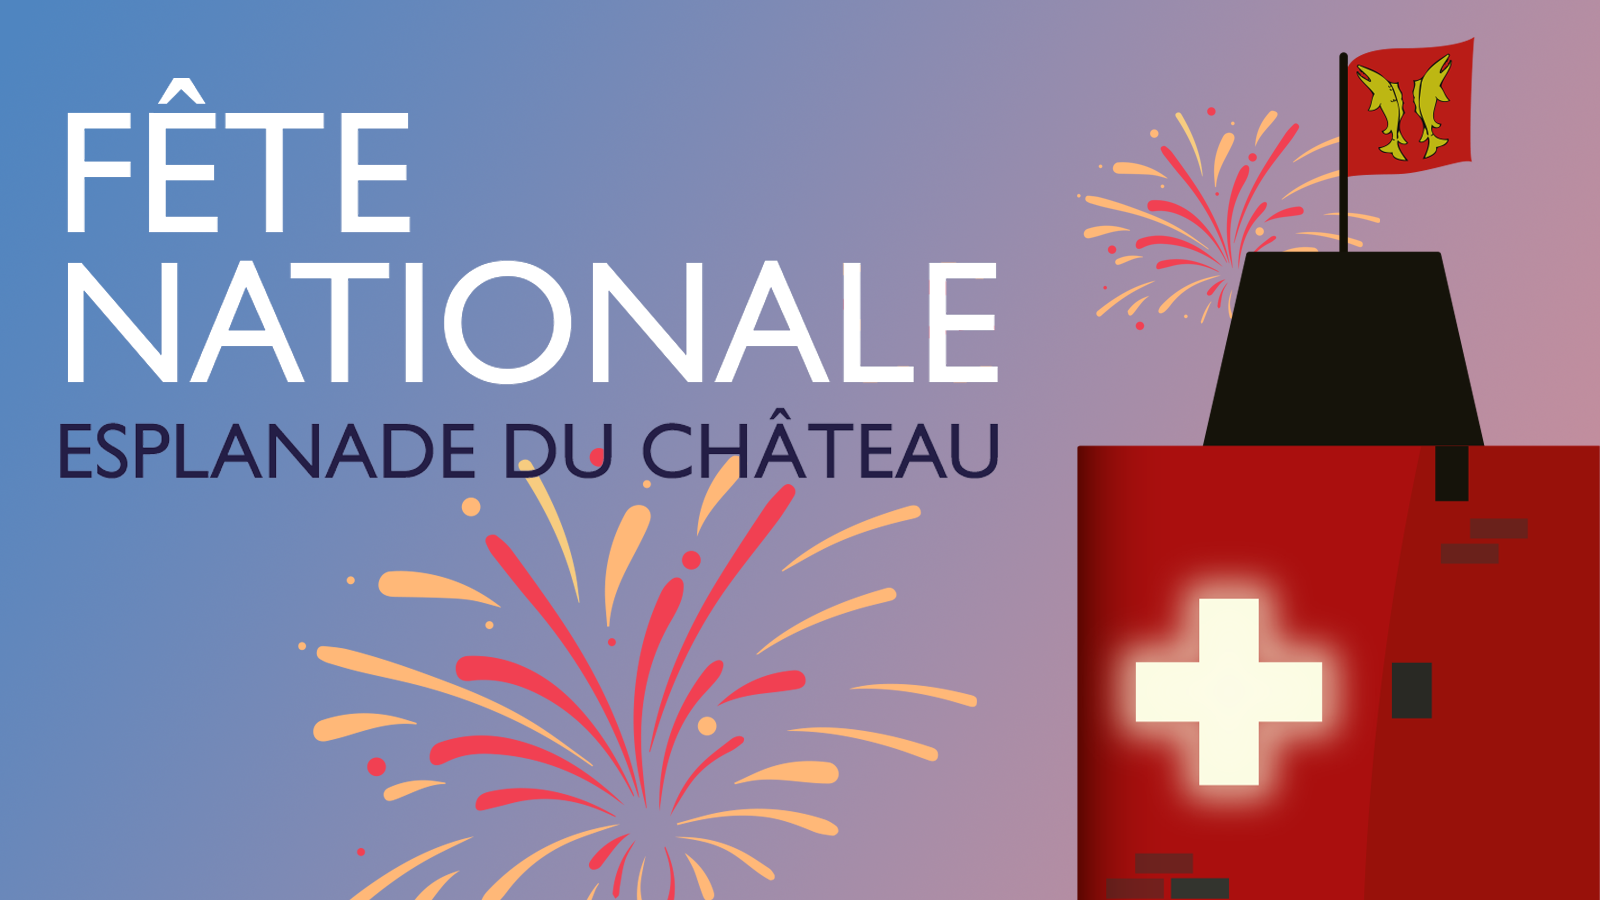 IMG Fete Nationale 1 aout orbestivales